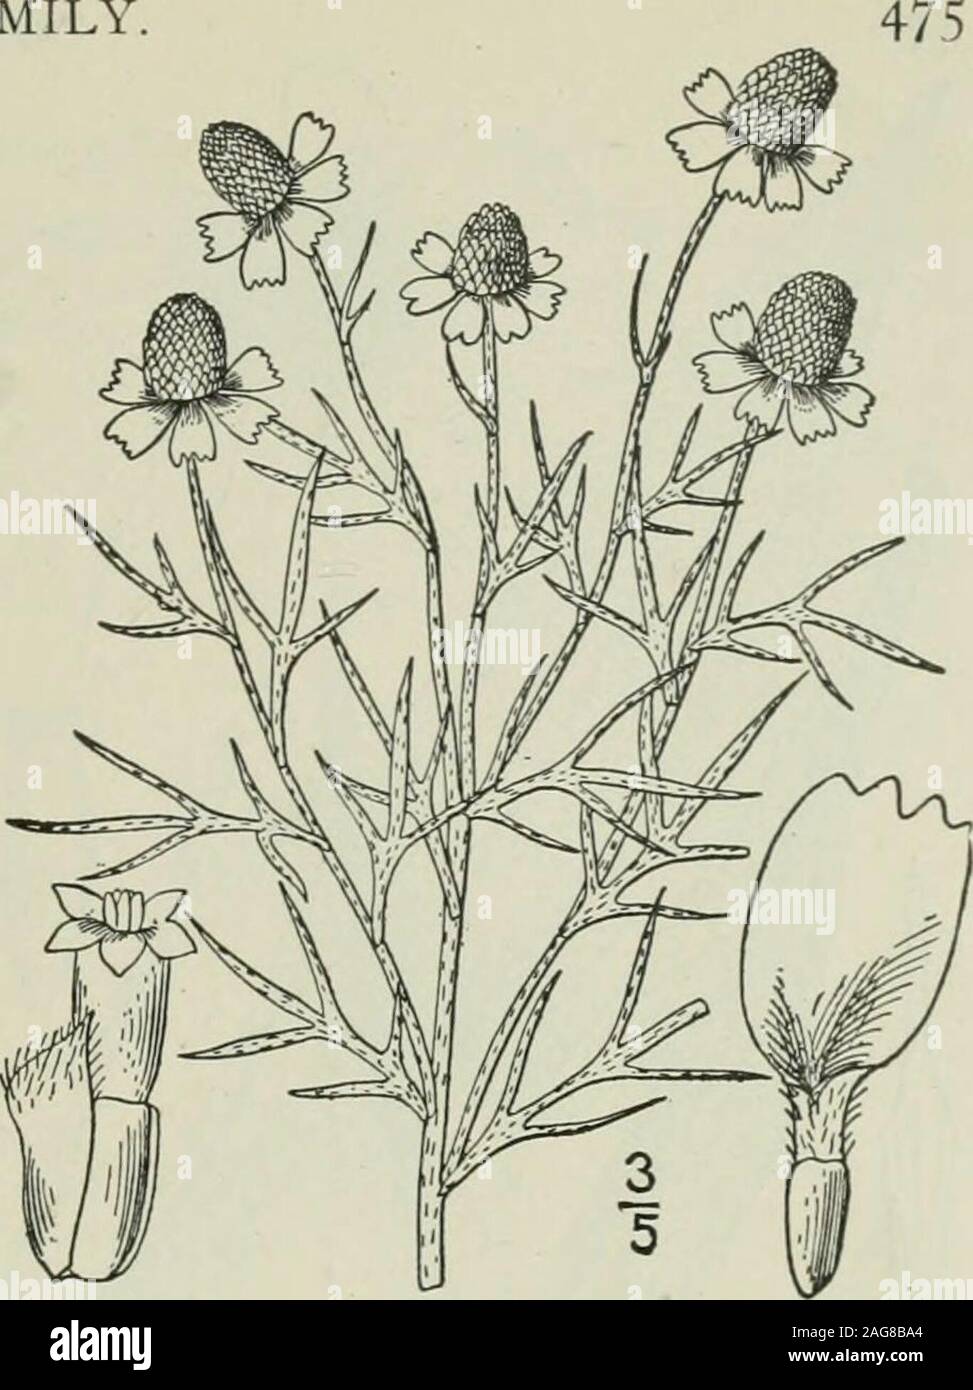 . An illustrated flora of the northern United States, Canada and the British possessions : from Newfoundland to the parallel of the southern boundary of Virginia and from the Atlantic Ocean westward to the 102nd meridian. Genus 63. THISTLE FAMILY.. 3. Ratibida Tagetes (lames) Barnhart.Short-rayed Cone-flower. Fig. 4455. Rudbeckia Tagetes James in Longs Exp. 2 : 68. 1823. Lepachys Tagetes A. Gray, Pac. R. R. Rep. 4: 103.1856. Ratibida Tagetes Barnhart, Bull. Torn Club 24: 100.1897. Rough-canescent; stem i°-ii° high, usuallymuch branched, leafy. Leaves firm, pinnatelydivided into 3-7 narrowfly l Stock Photo